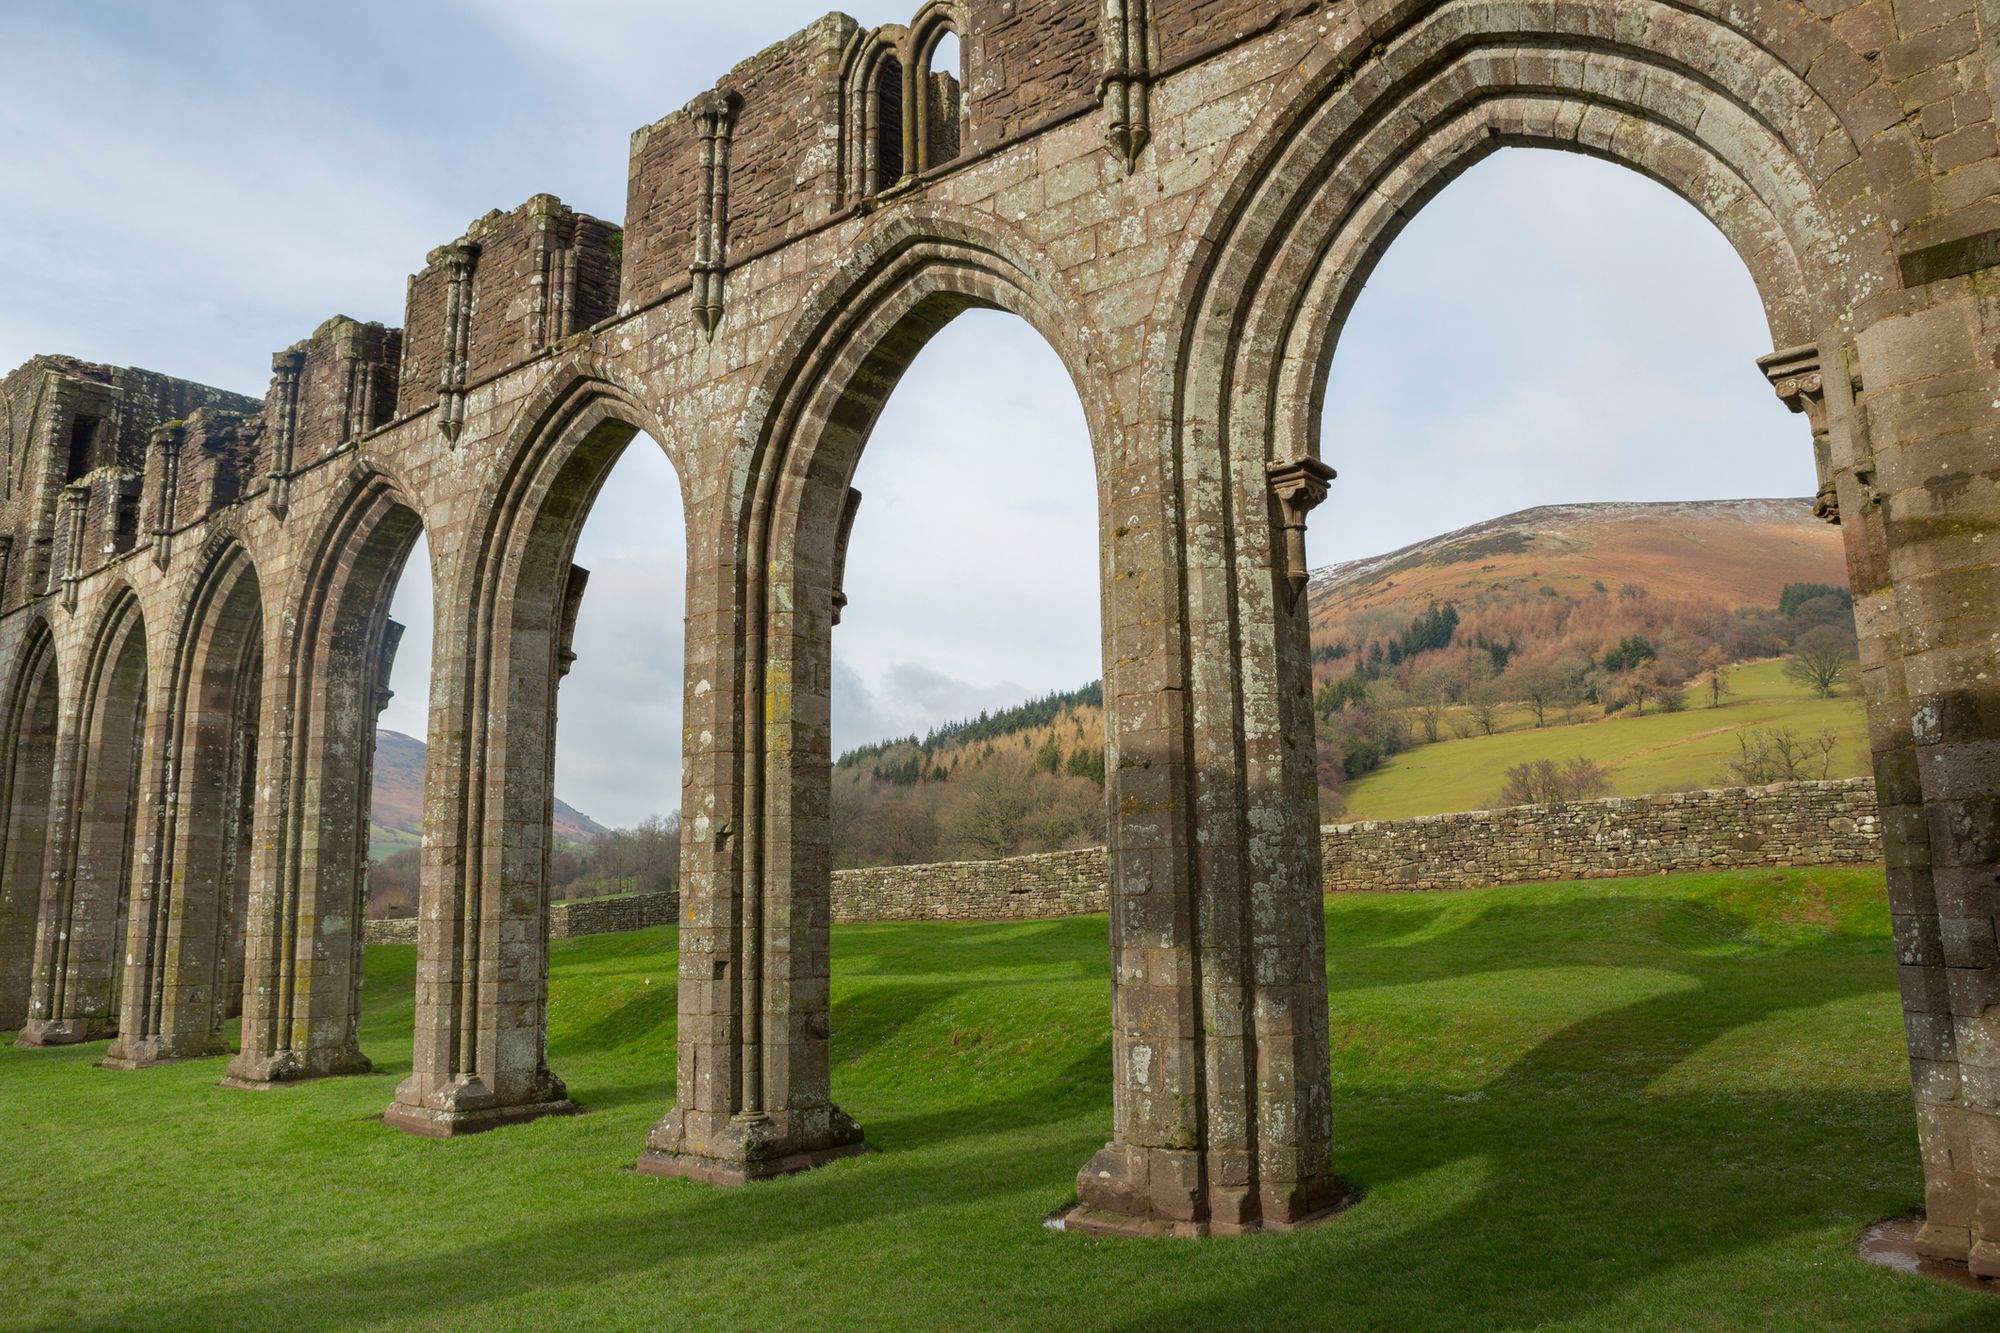 The rolling hills with Offa's Dyke on top, pictured through Llanthony priory's arches